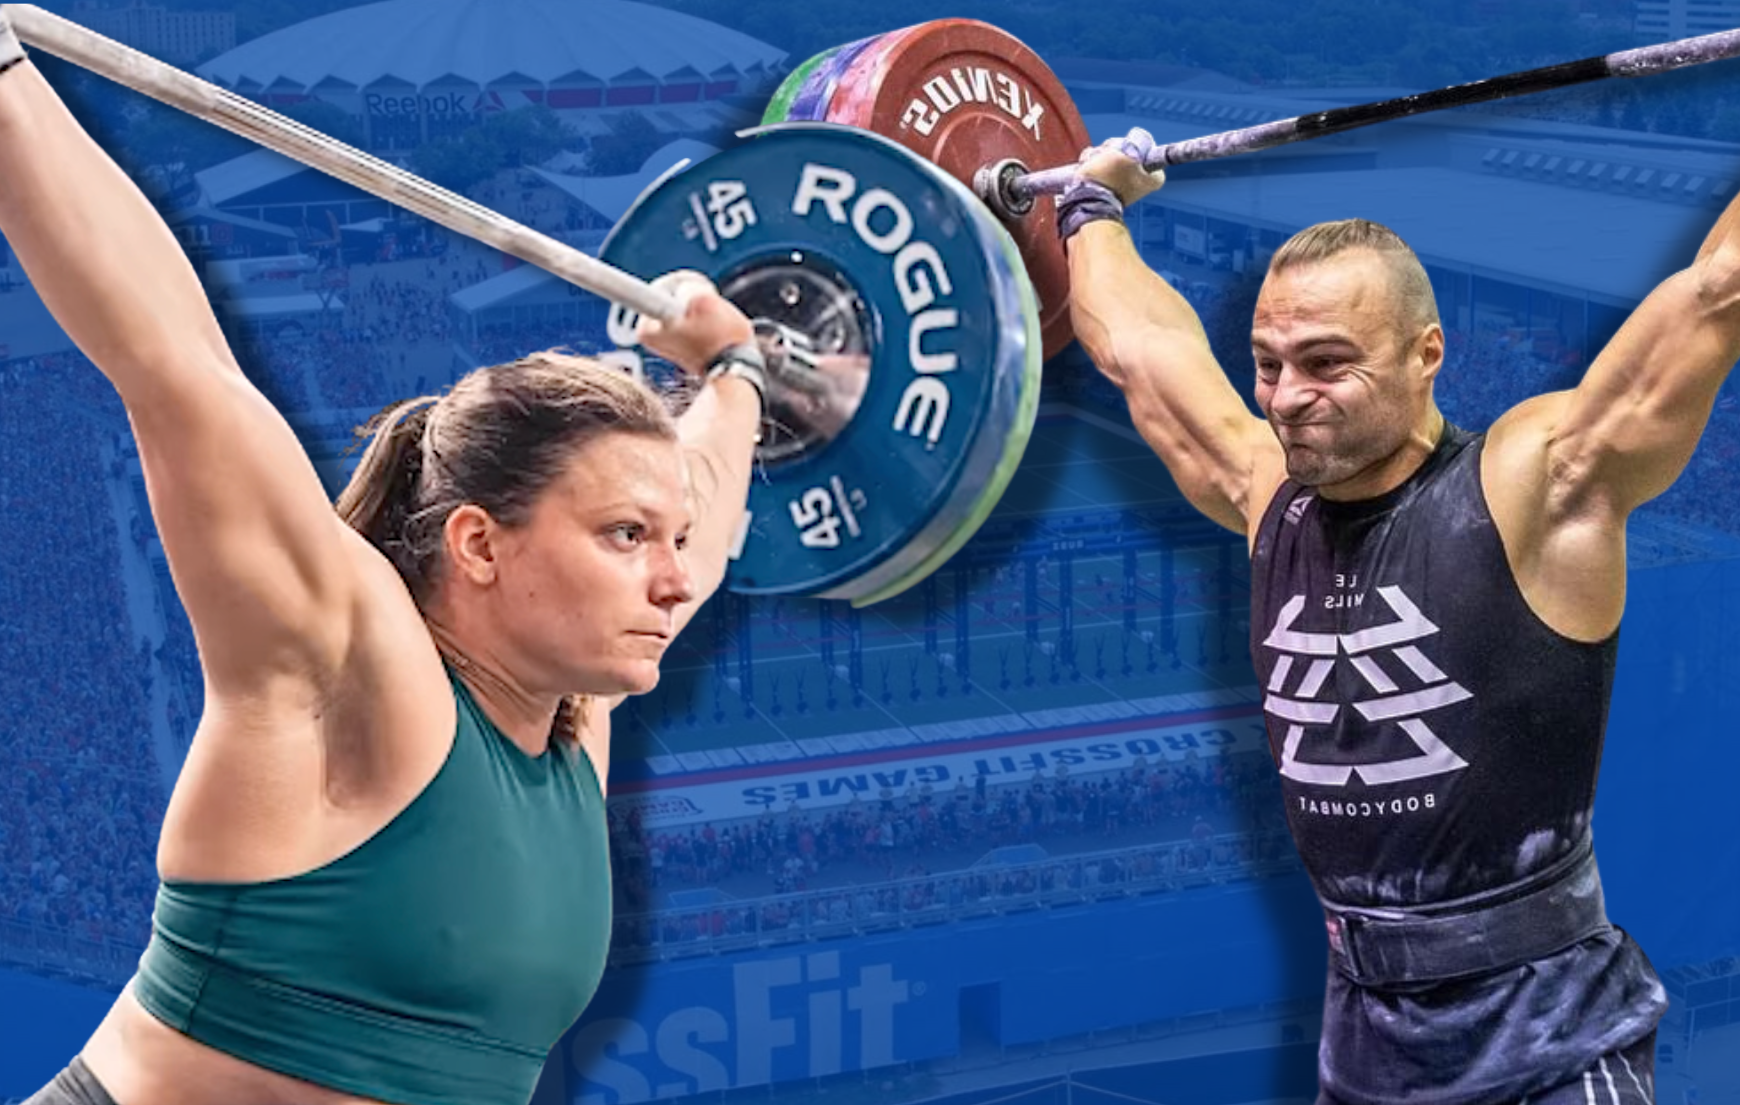 All Lift Results From "Oly Total" Event at 2023 CrossFit Games